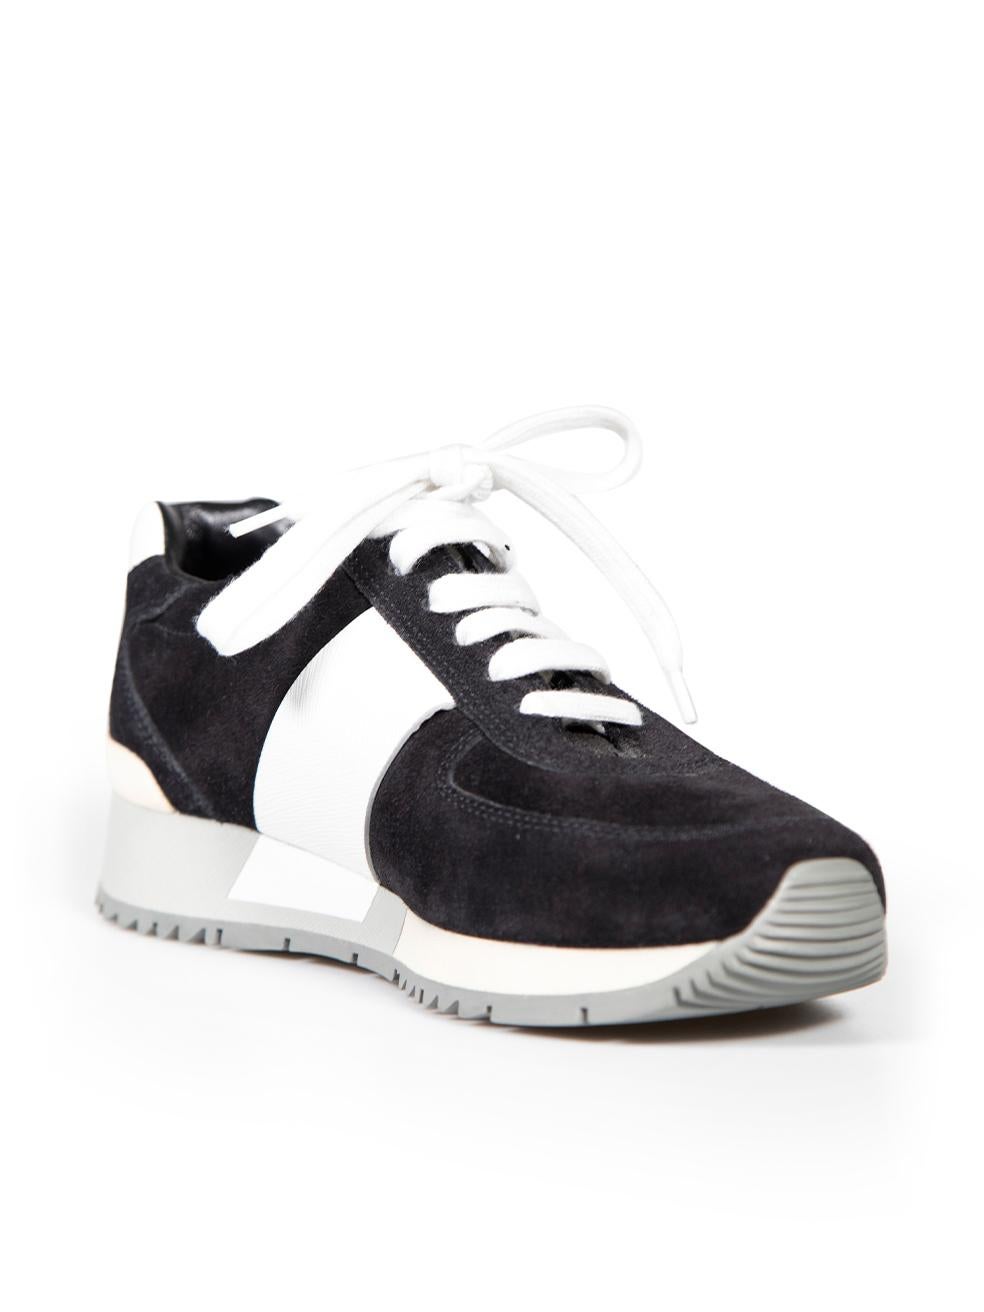 Condition
 
 CONDITION is Never worn. No visible wear to trousers is evident on this new Prada Sport designer resale item.
 
 Details
 
 
 
 Black
 
 Suede
 
 Trainers
 
 Lace up fastening
 
 White leather stripe
 
 Round toe
 
 
 
 
 
 Size: UK 2 /